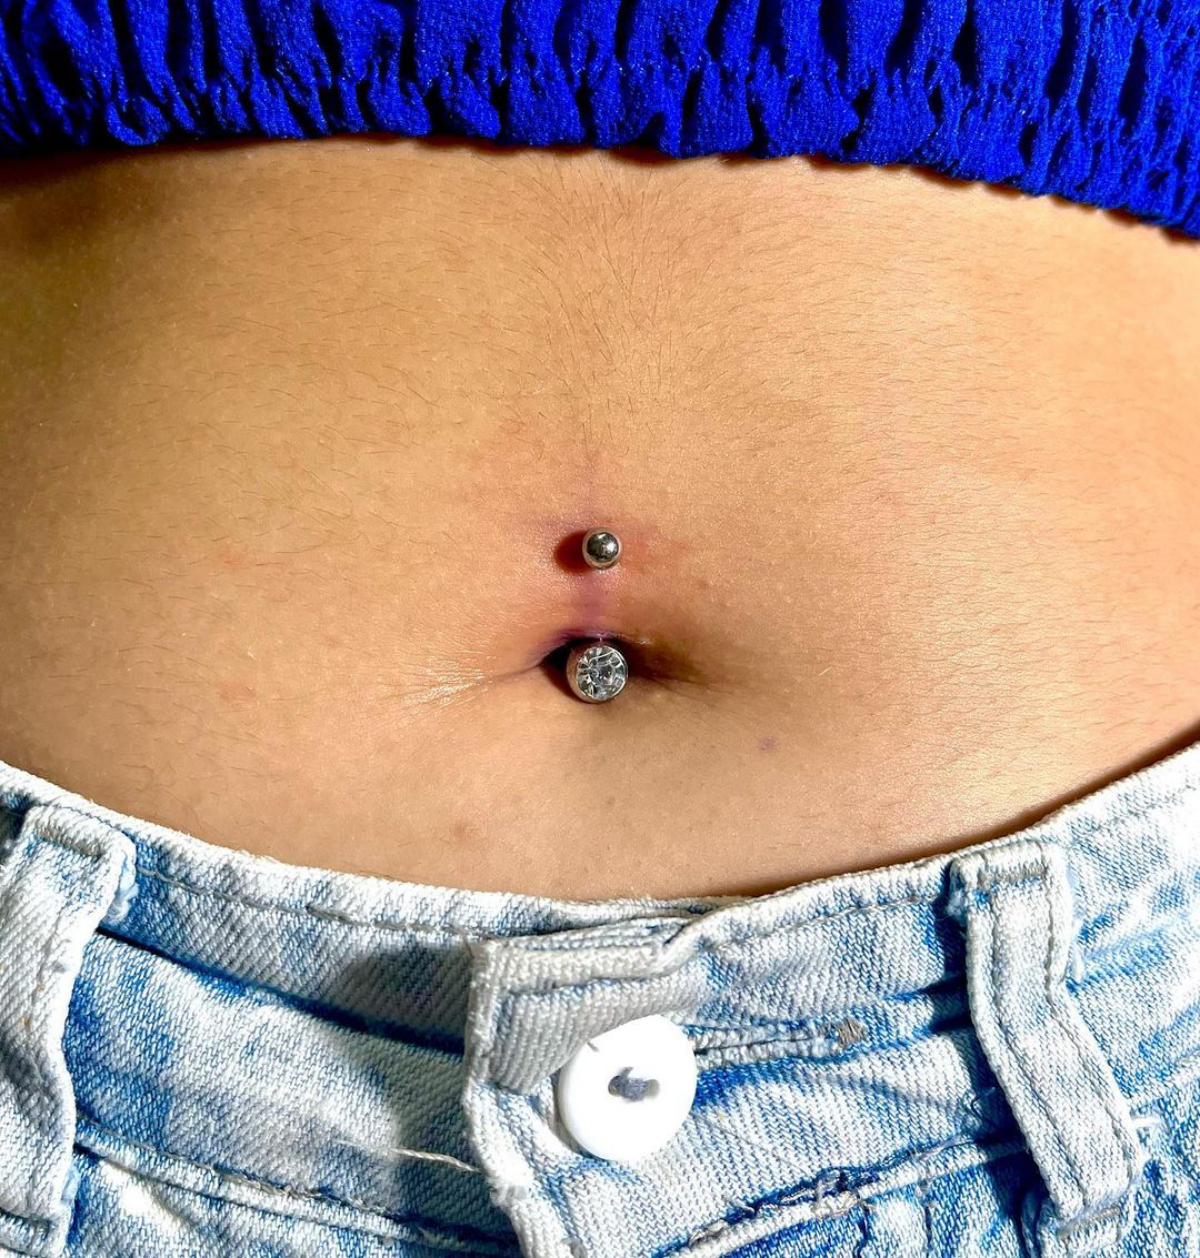 6 person with belly piercing